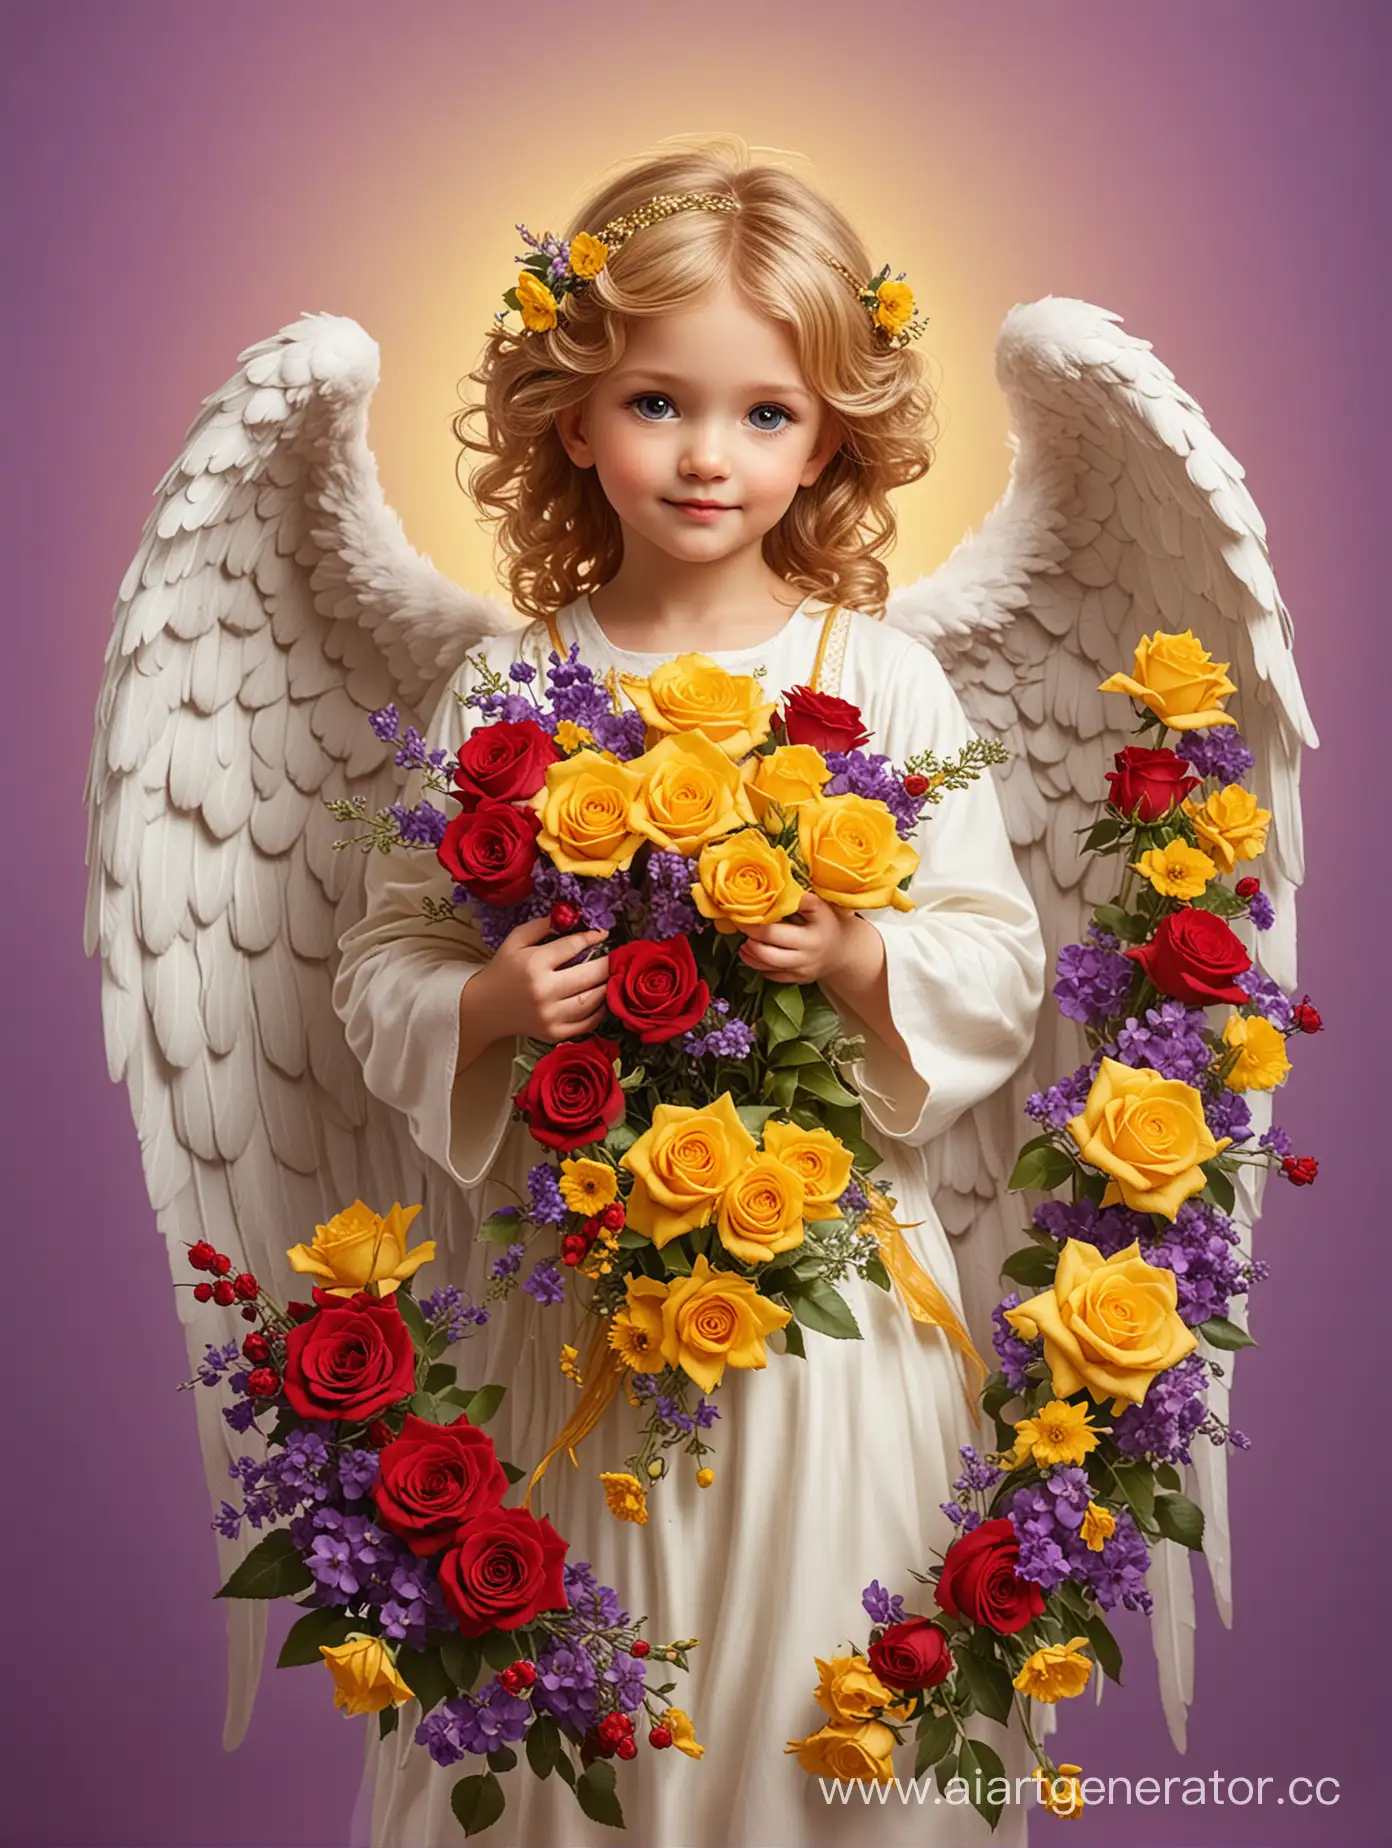 Heavenly-Angel-Holding-Exotic-Flower-Bouquet-on-RedYellow-Gradient-Background